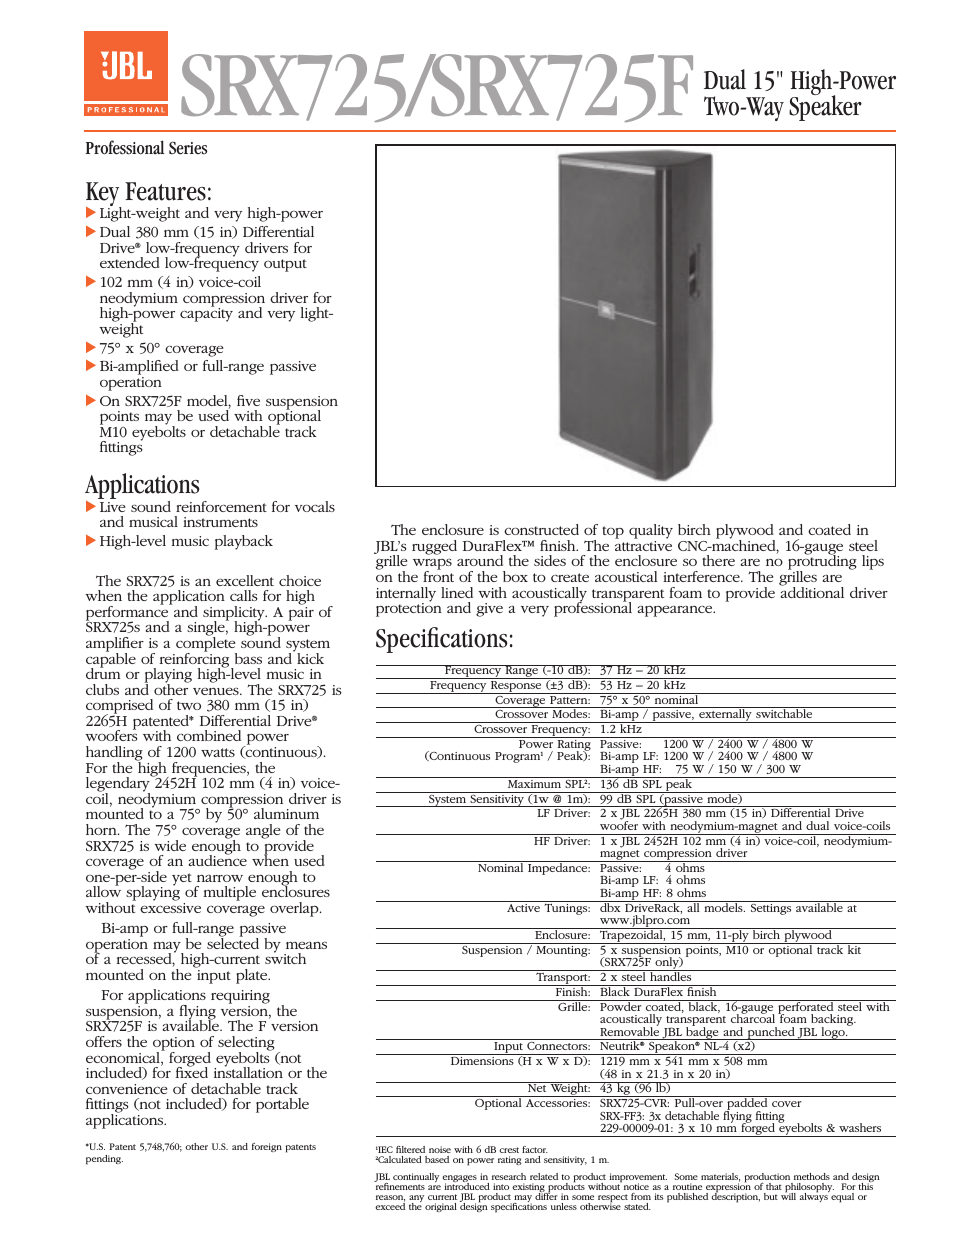 High-Power Two-Way Speaker SRX725 (Page 1)